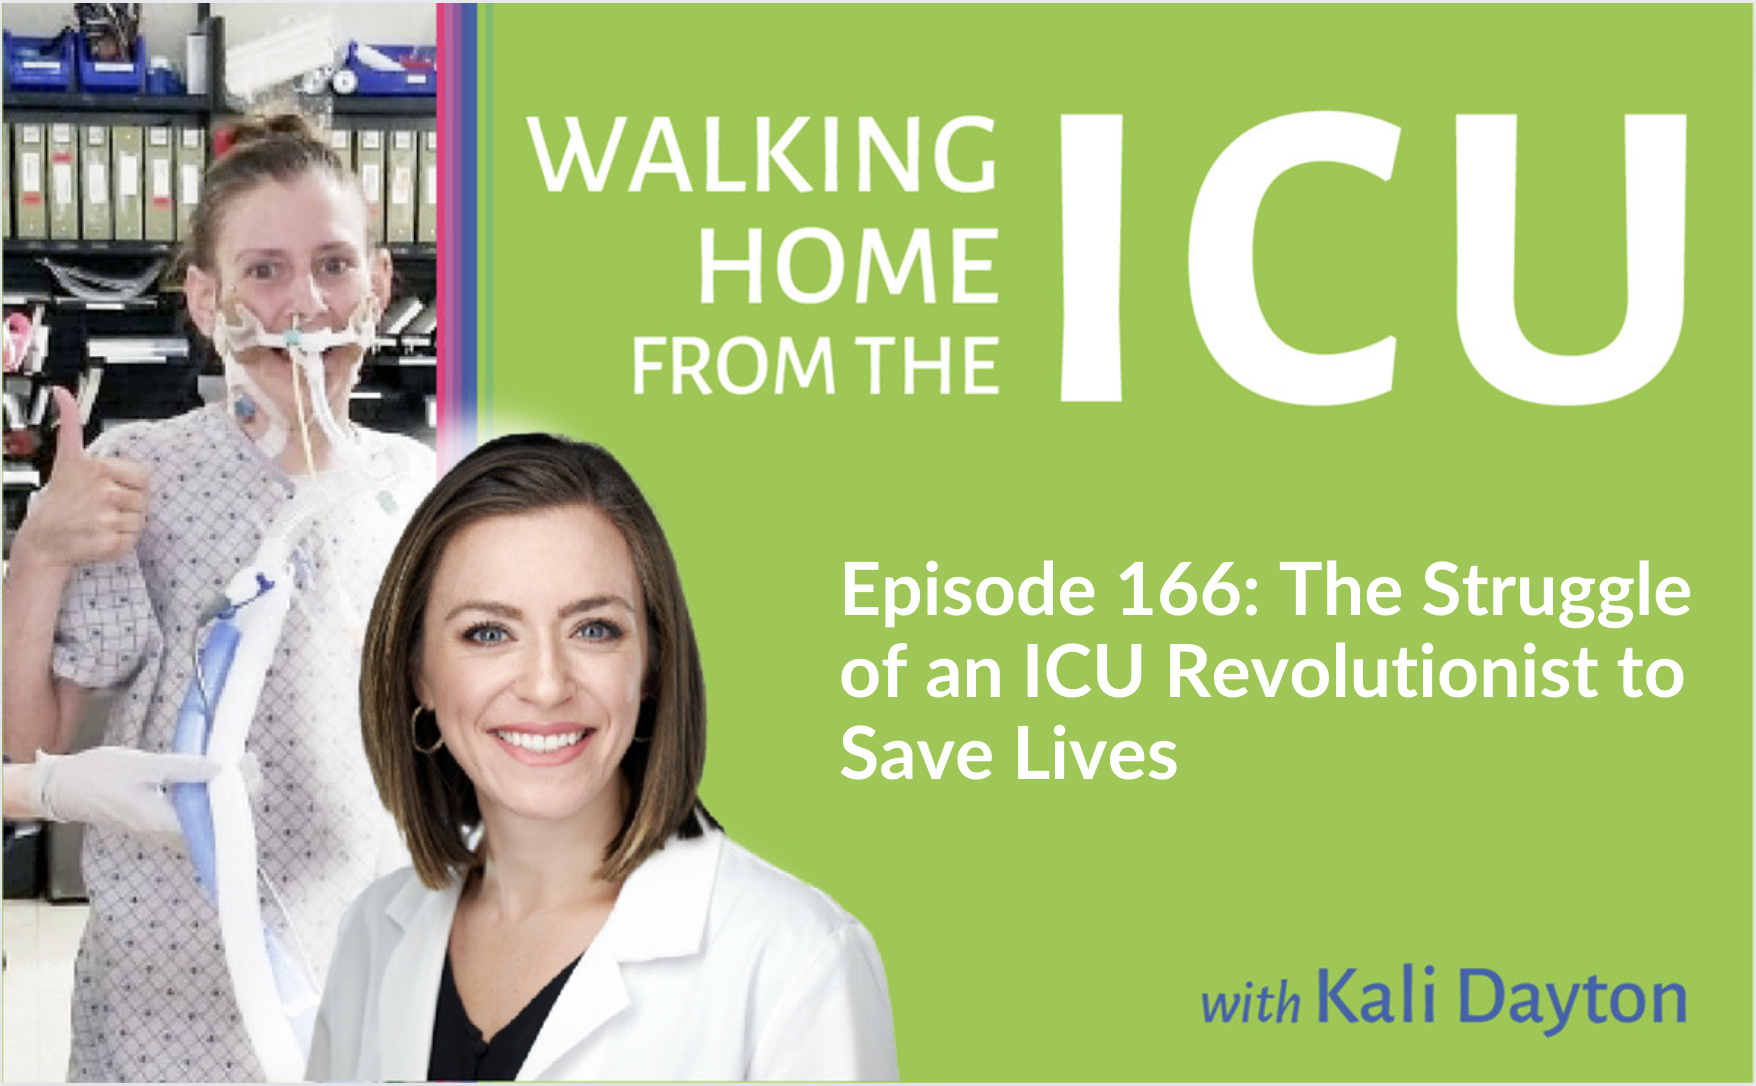 Episode 166 The Struggle of an ICU Revolutionist to Save Lives